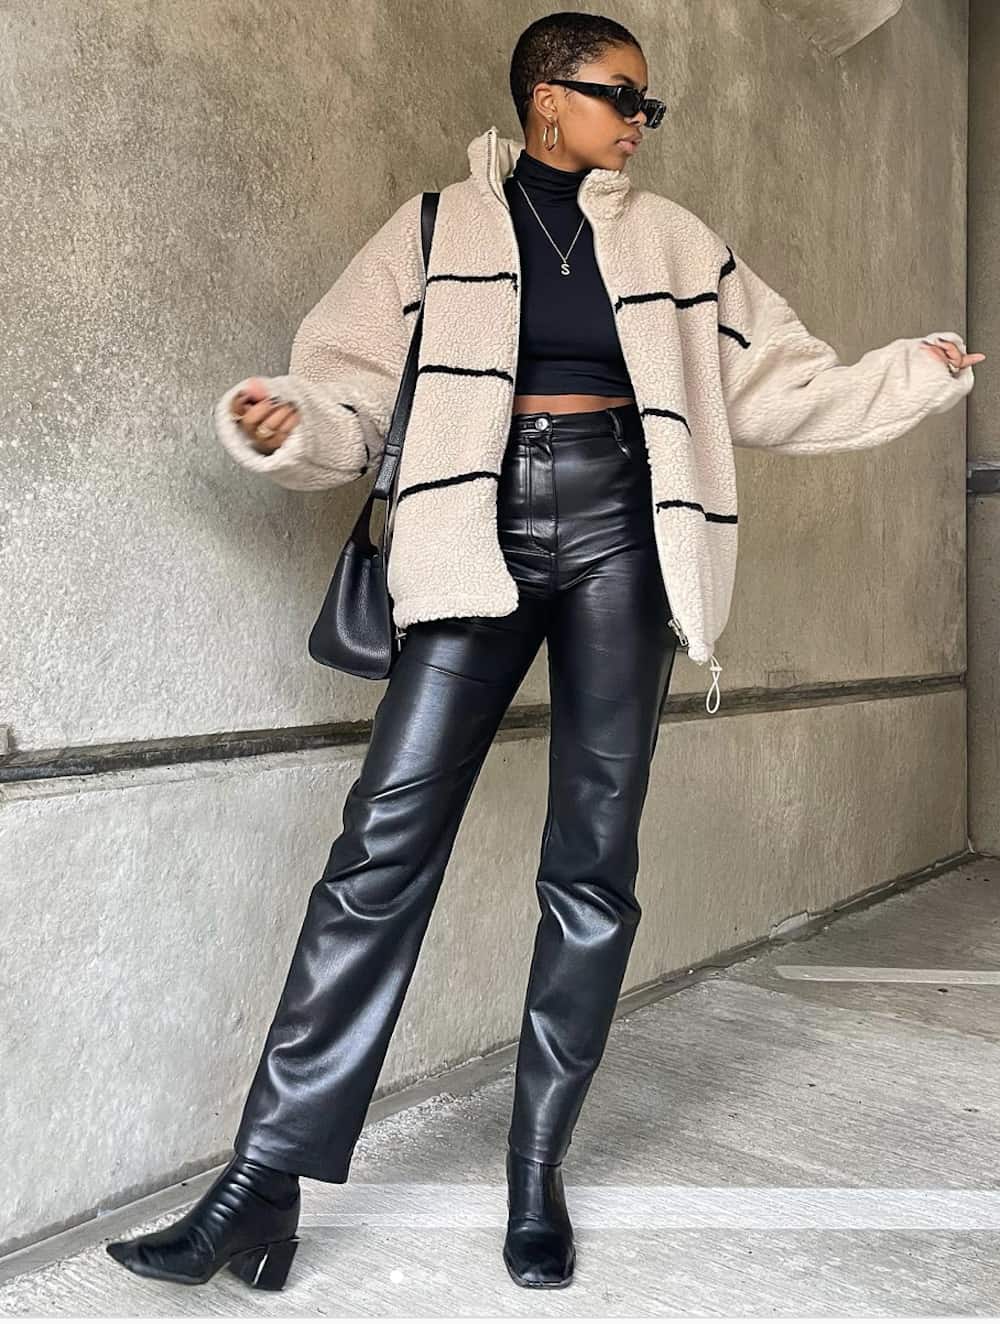 19+ Leather Pants Outfit Ideas That Prove You Need A Pair!